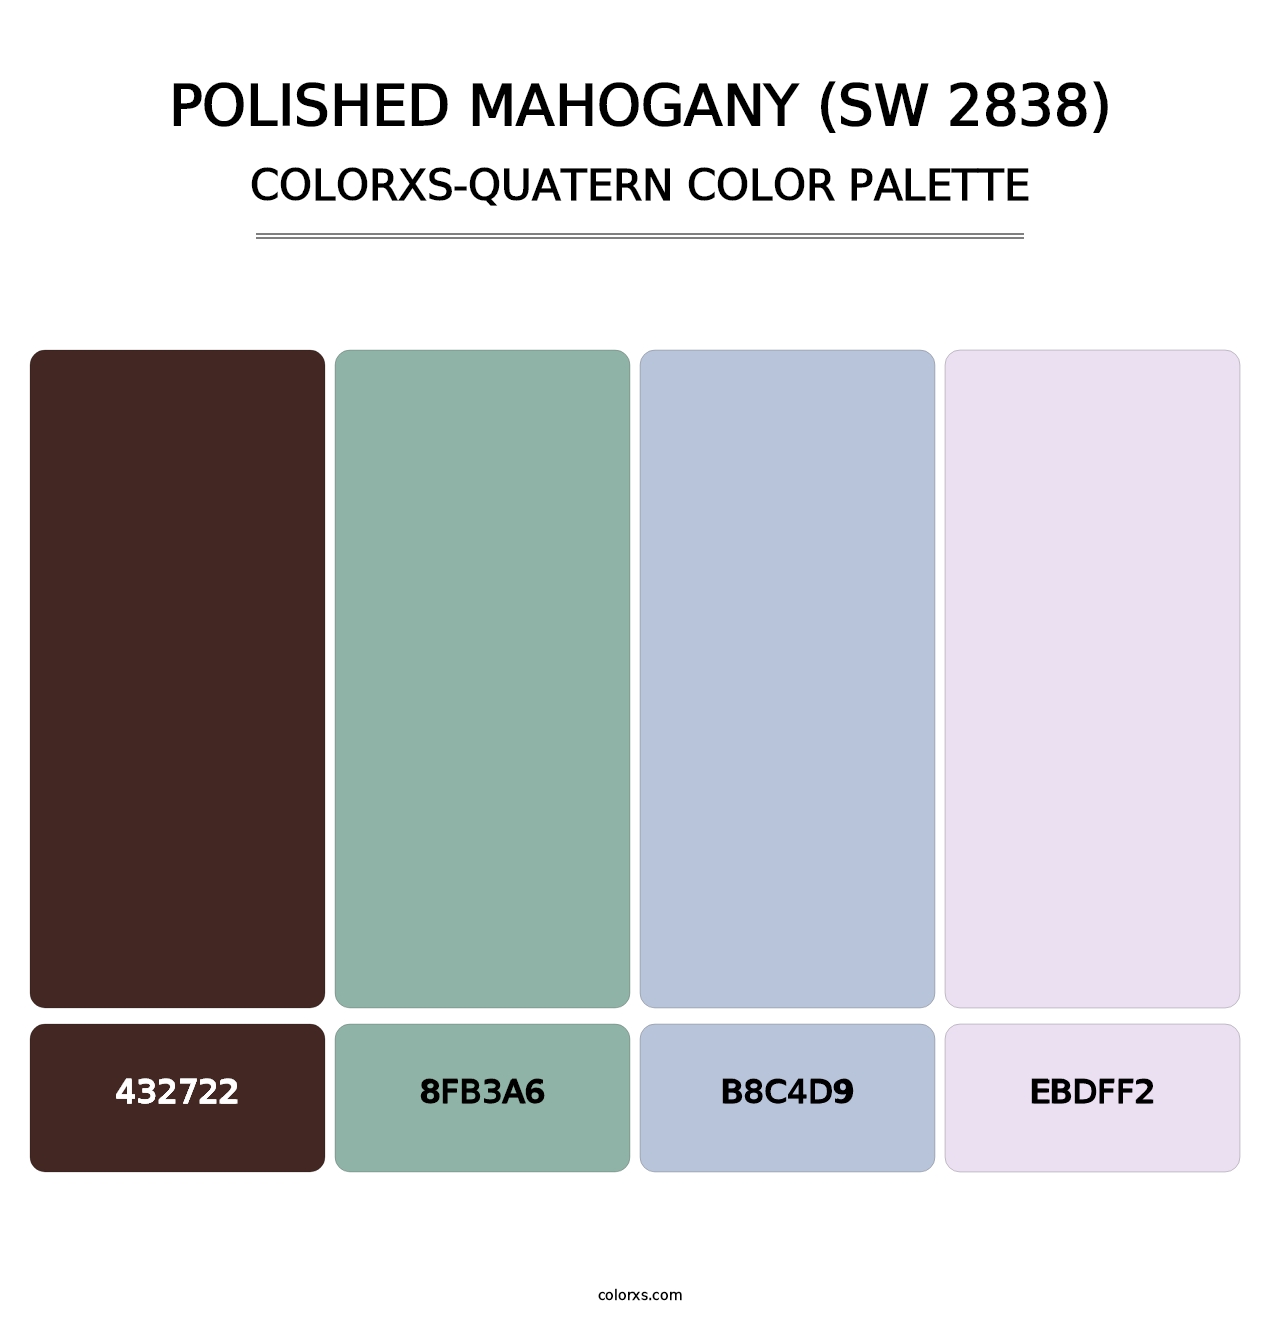 Polished Mahogany (SW 2838) - Colorxs Quatern Palette